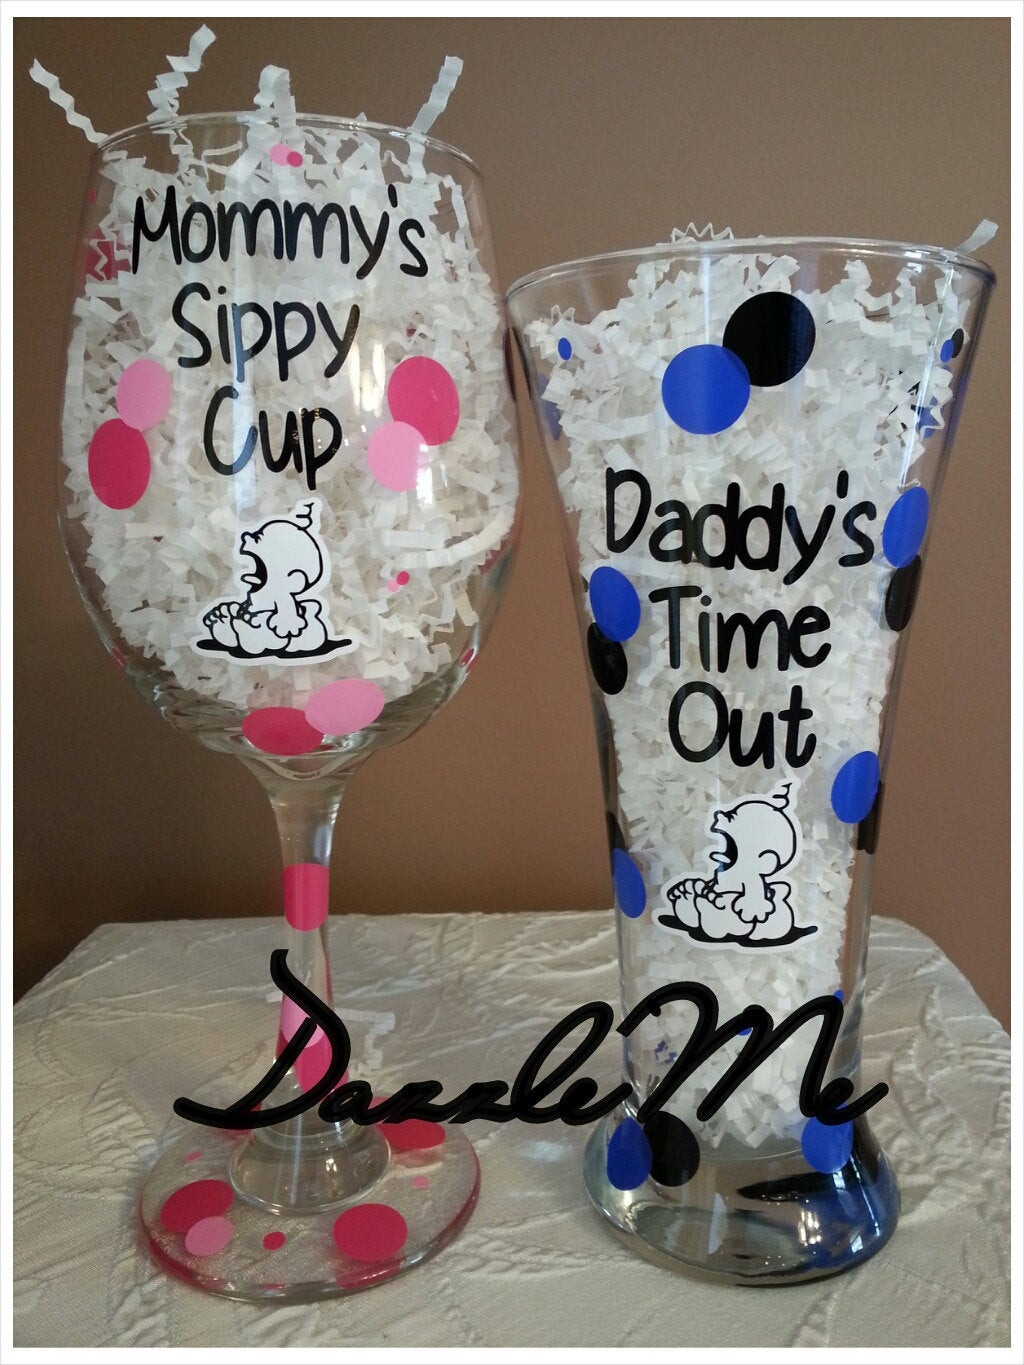 Typical Baby Shower Gifts
 Cute Baby Shower Gift Mommys Sippy Cup & by DazzleMeByCamelle